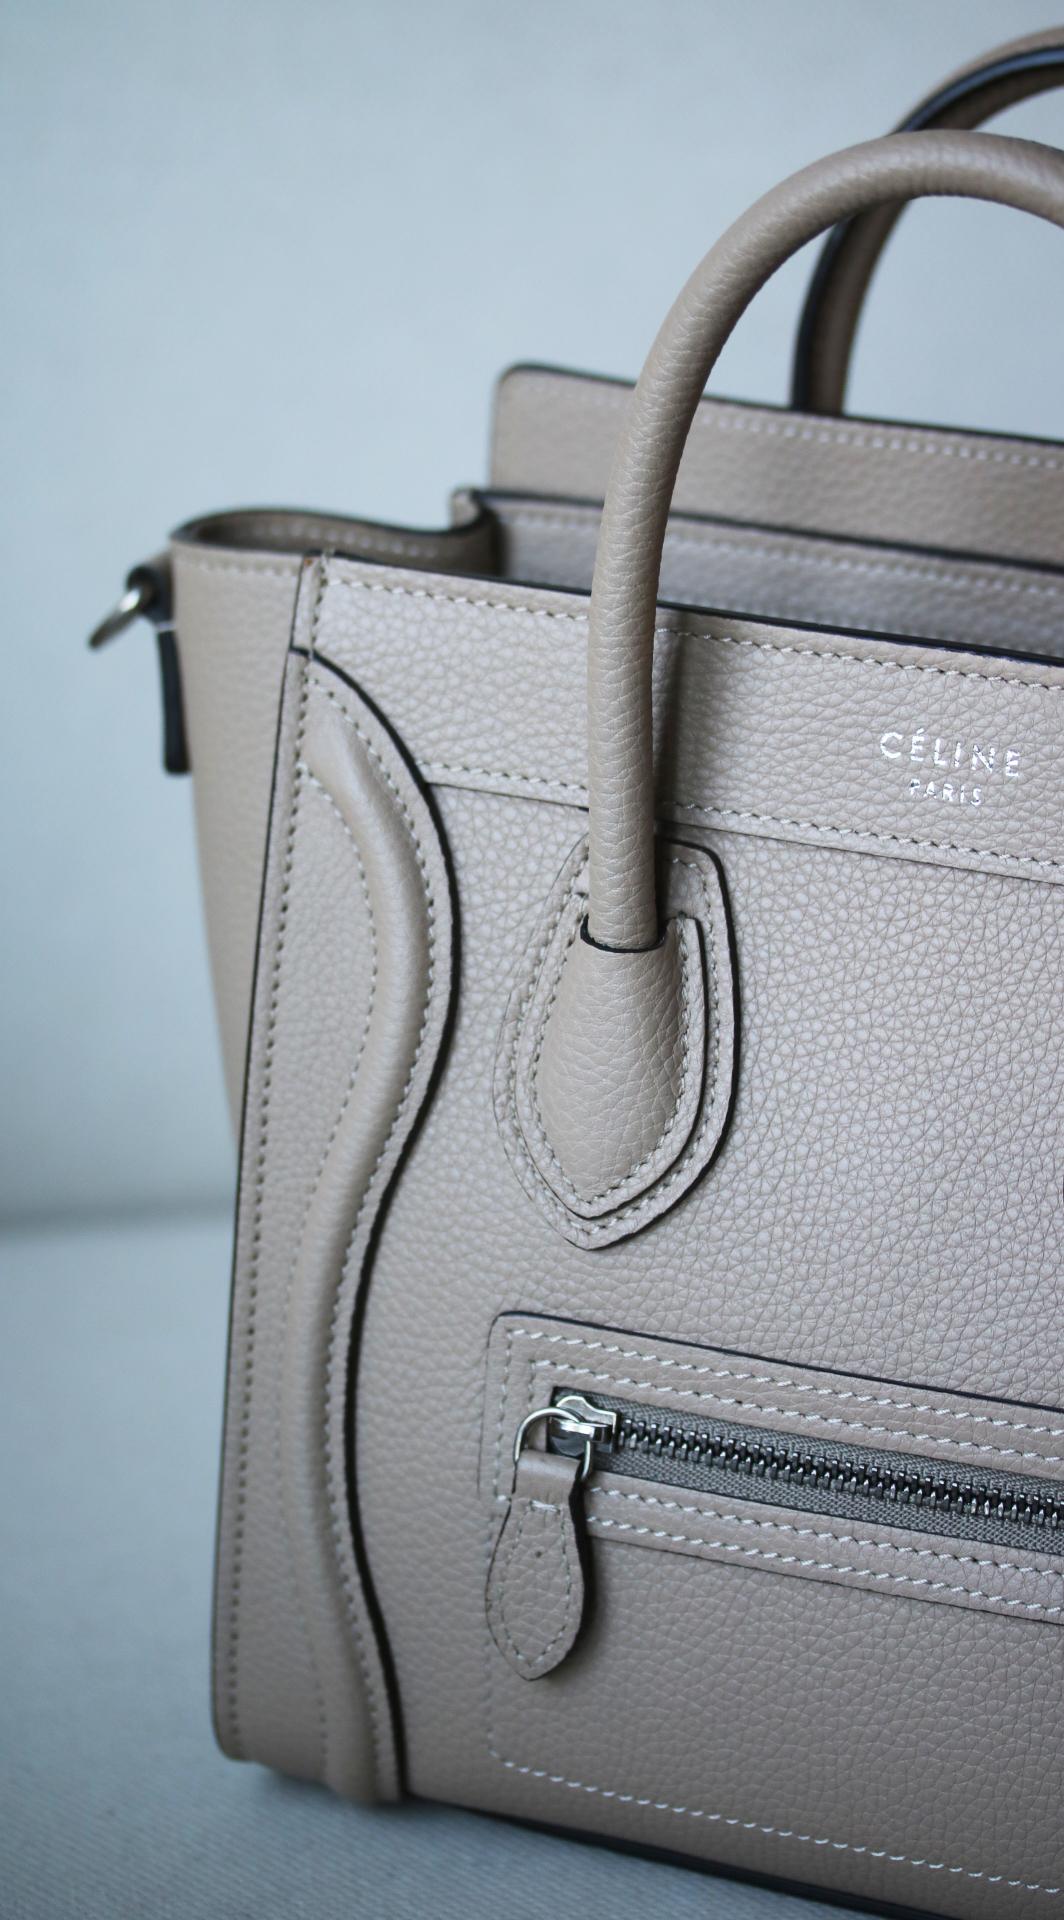 Céline Nano luggage bag in drummed calfskin. Leather handles and removeable shoulder strap. Zip closure. Zipped outer pocket on the front. Silver-tone metal hardware. Colour: Taupe. 100% Calfskin. Lining: 100% calfskin. Does not come with a dustbag.